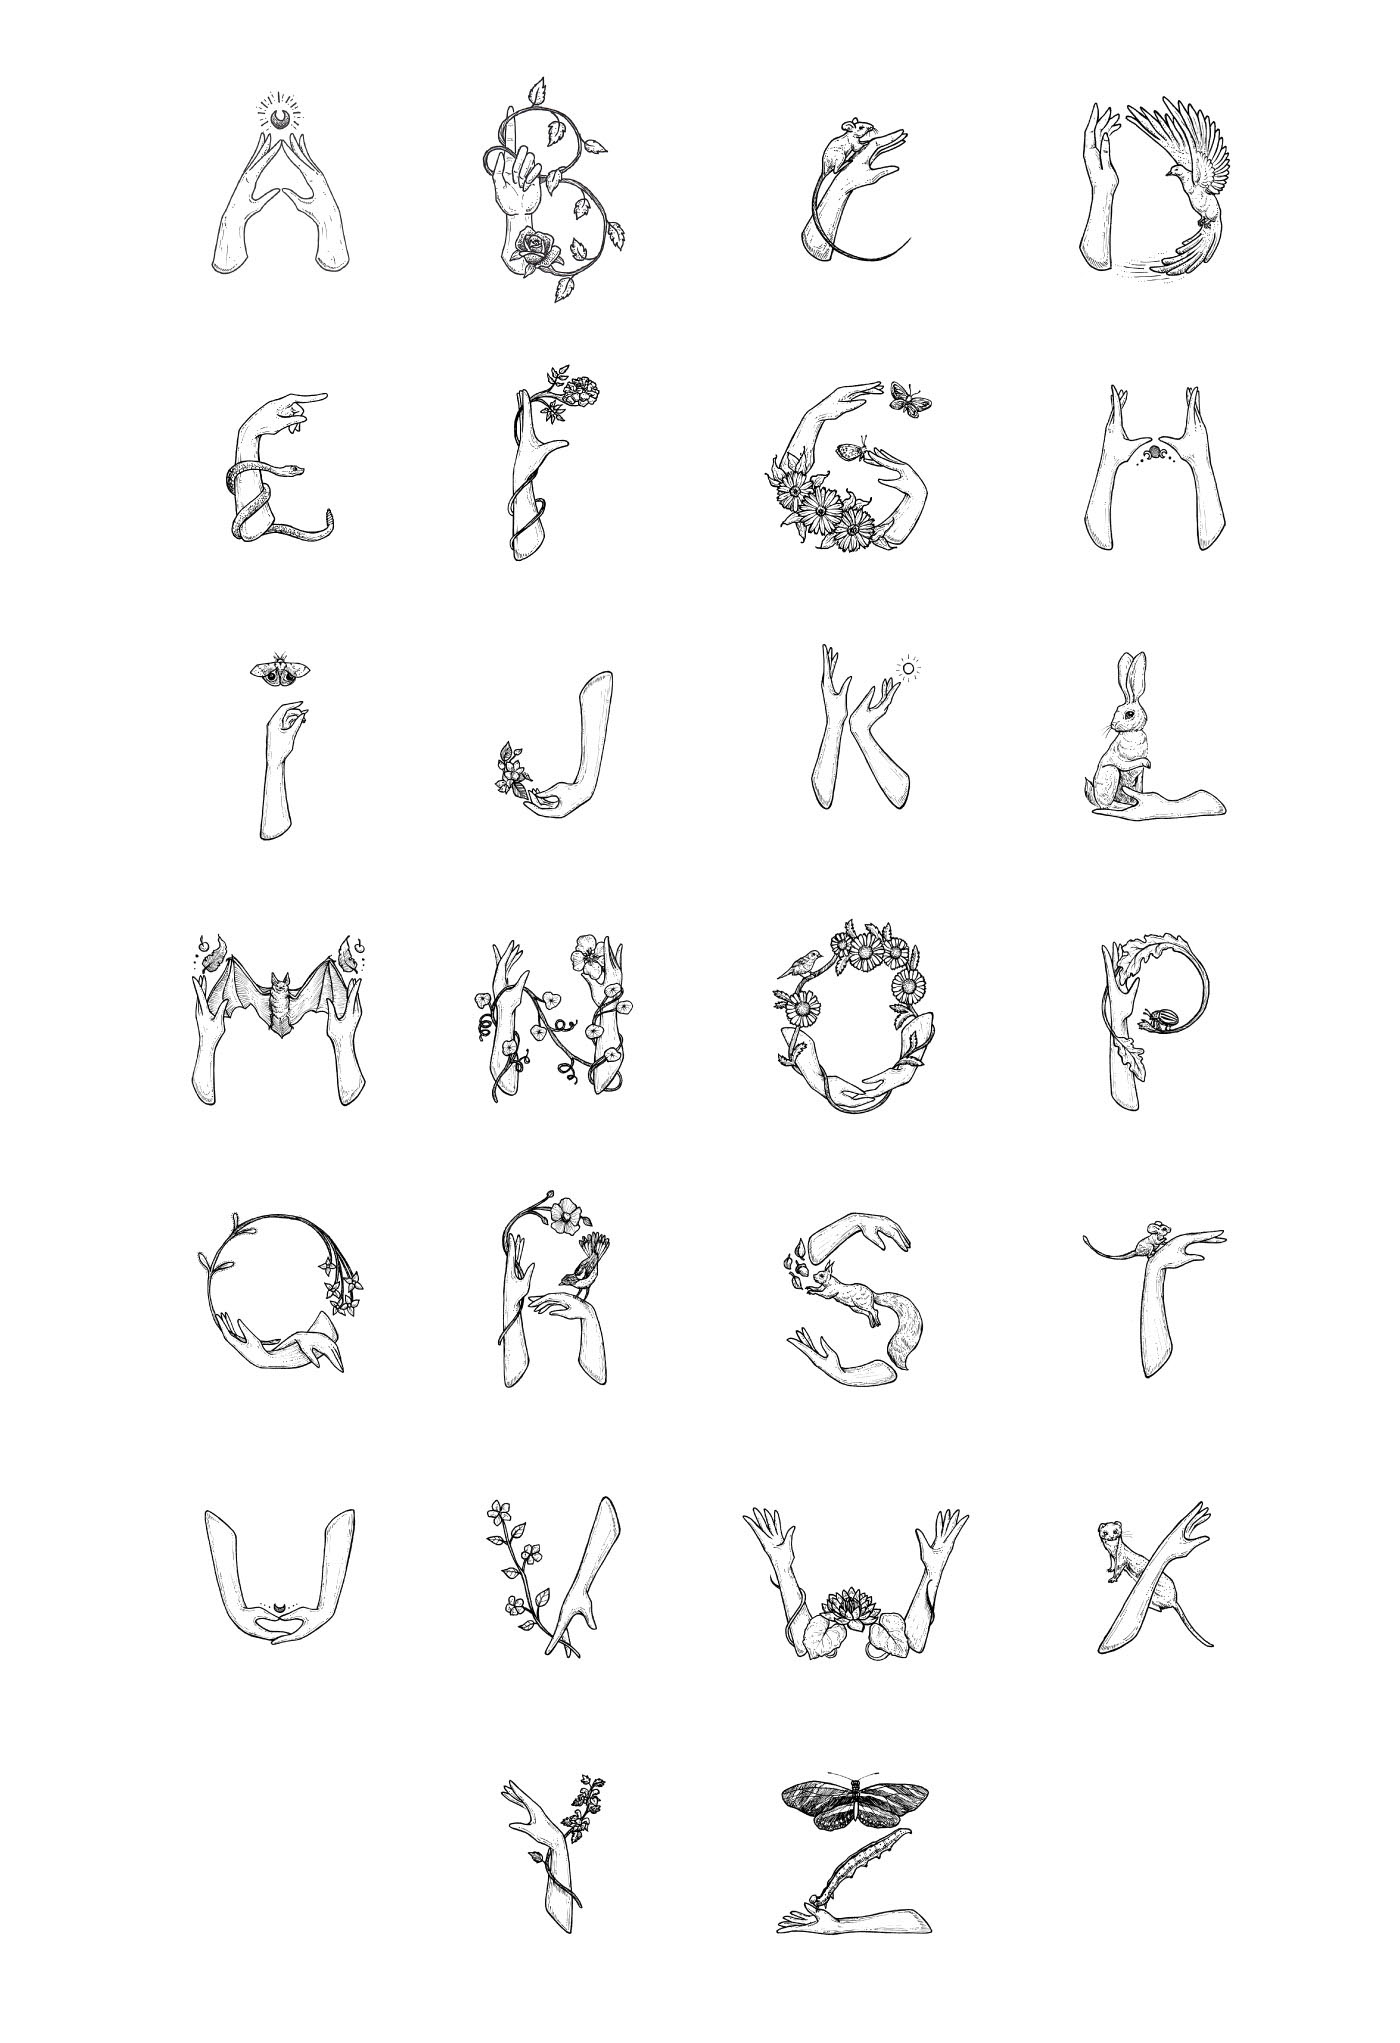 36daysoftype Typographyy type lettering animals plants Nature hands alphabet letter